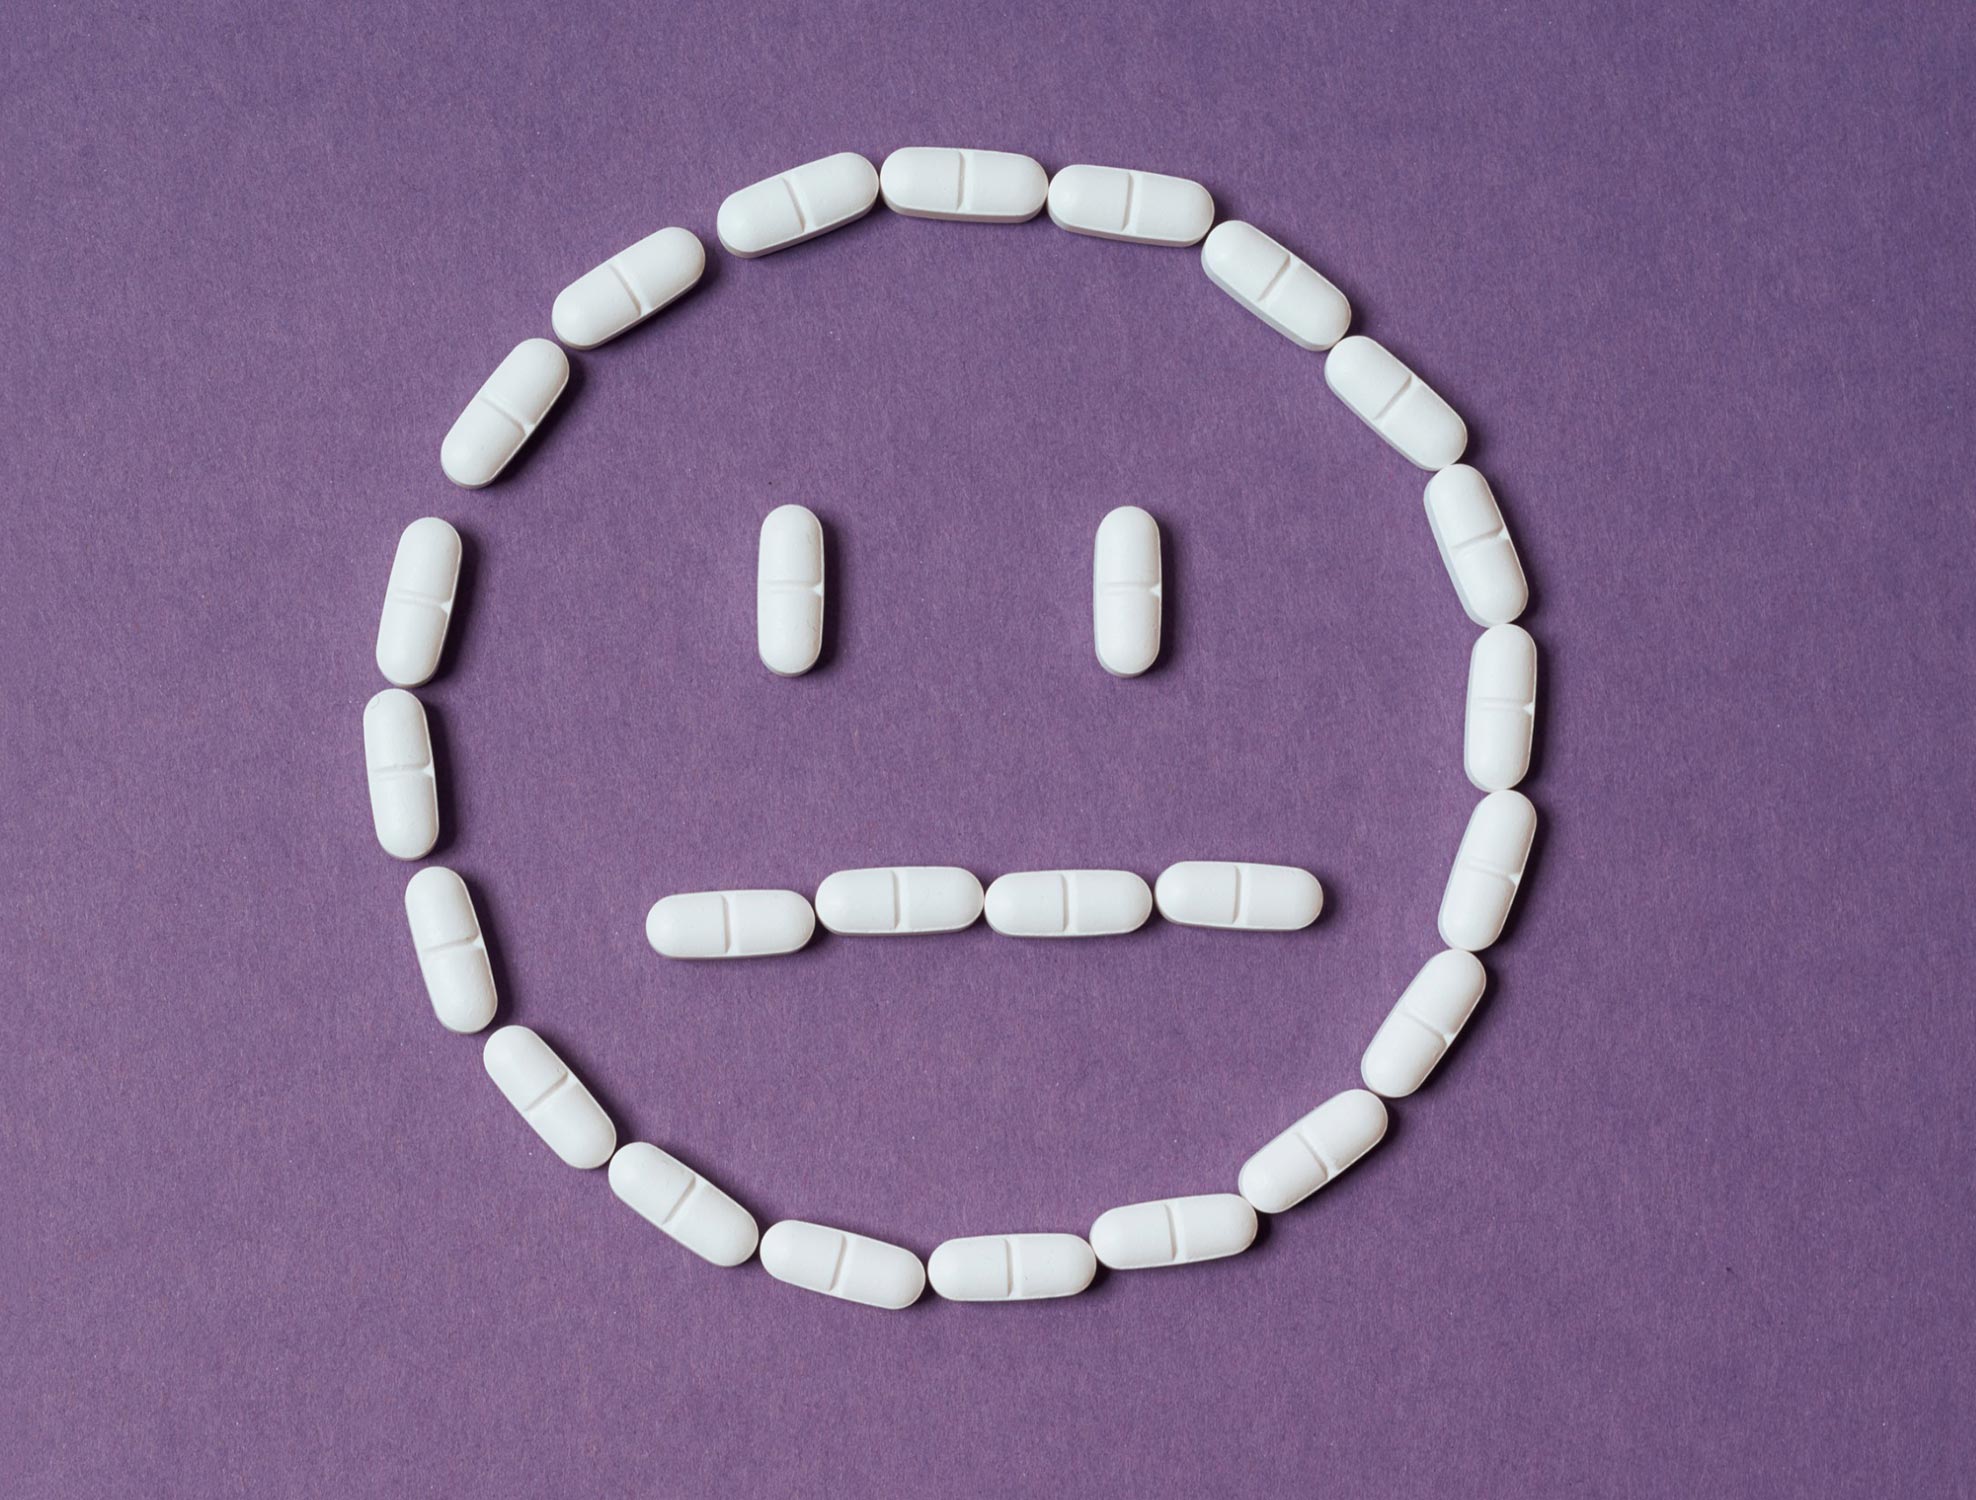 Emotionally dulled indifferent pills concept